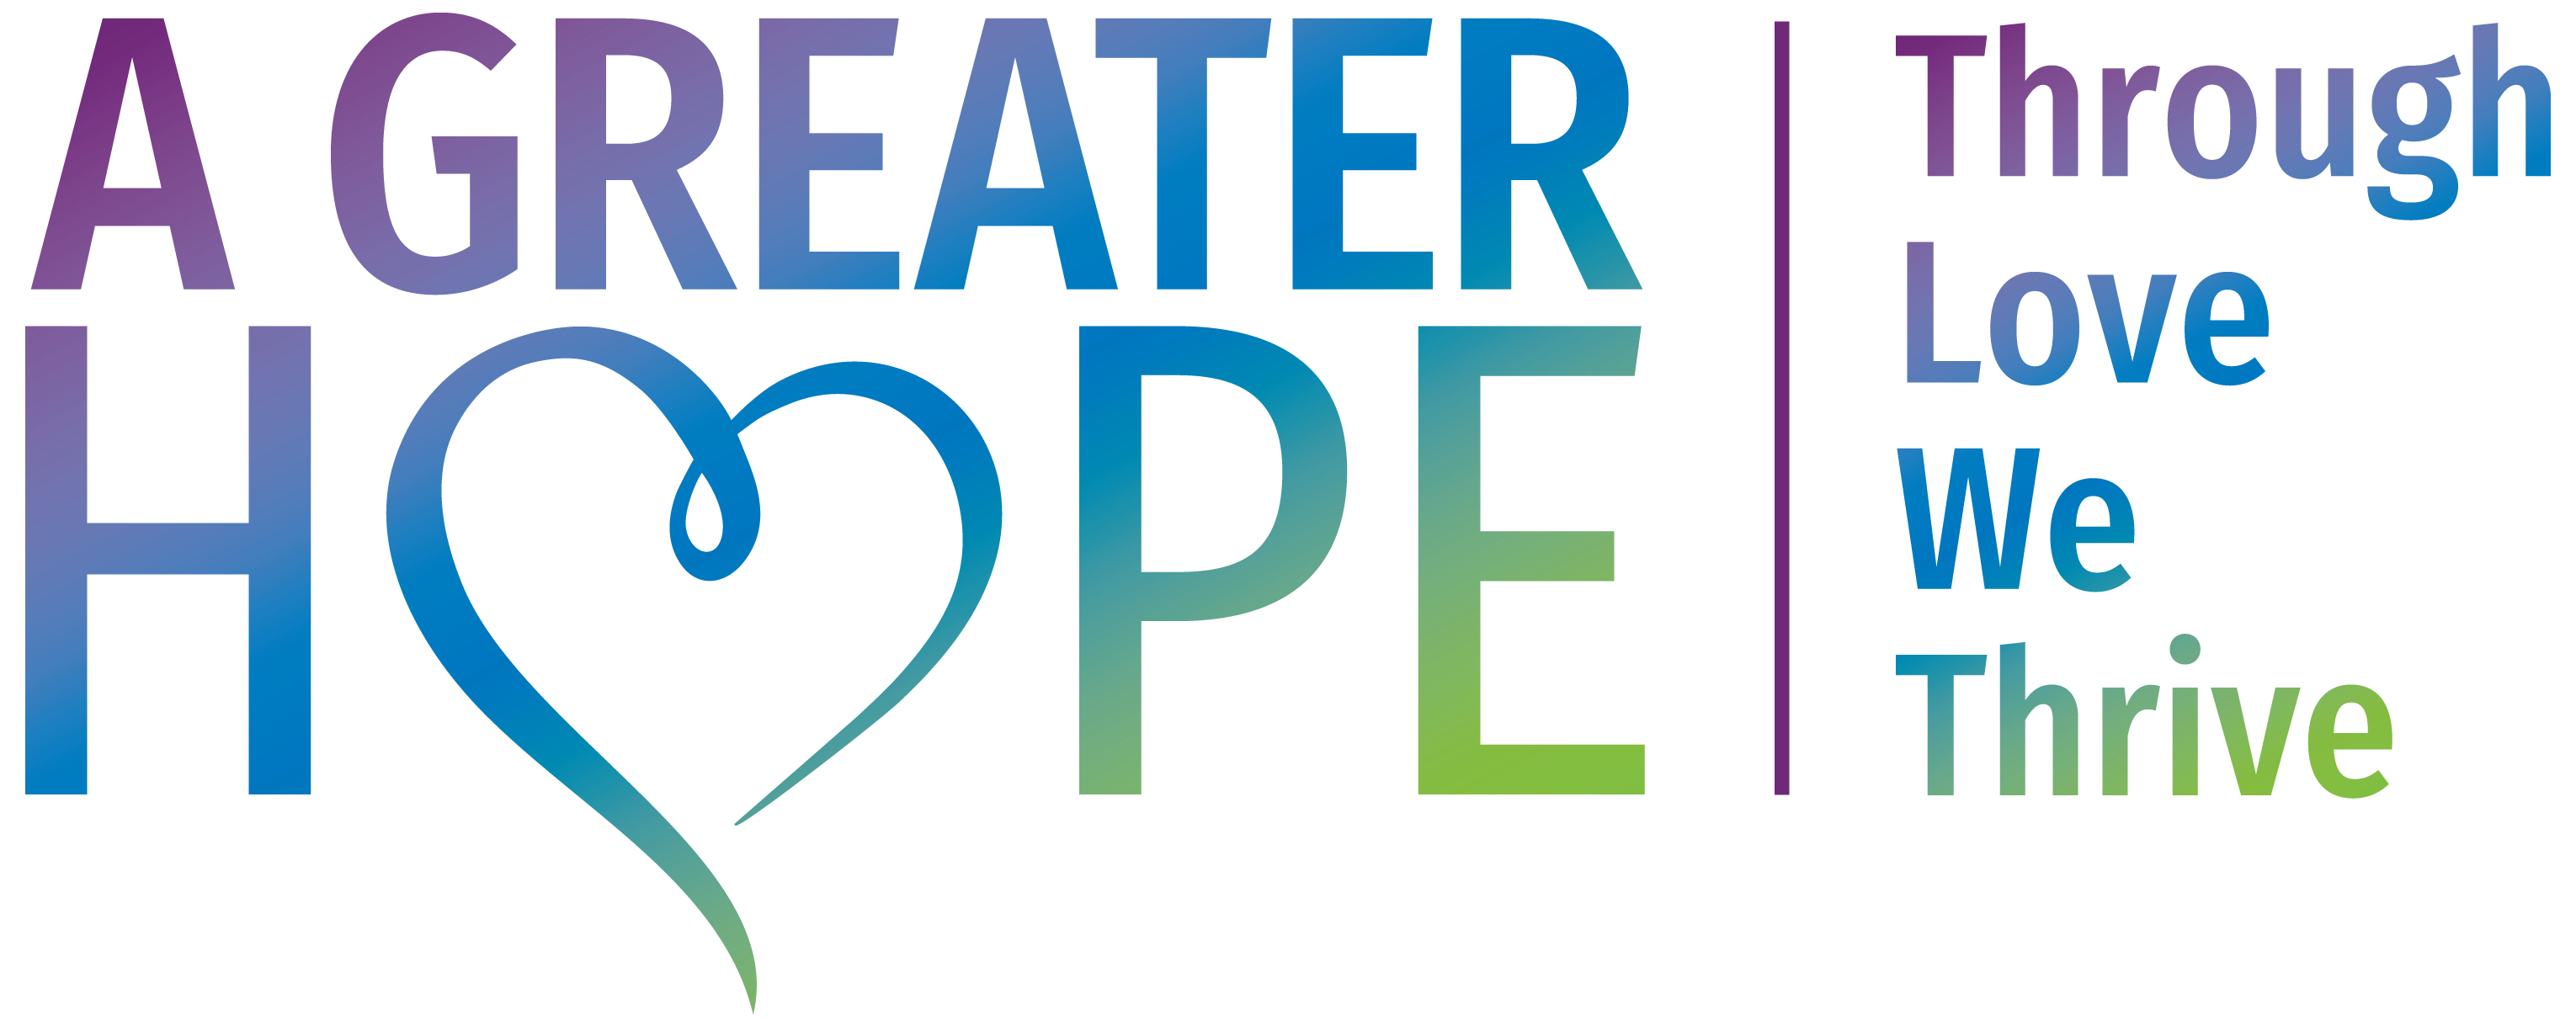 A Greater Hope logo